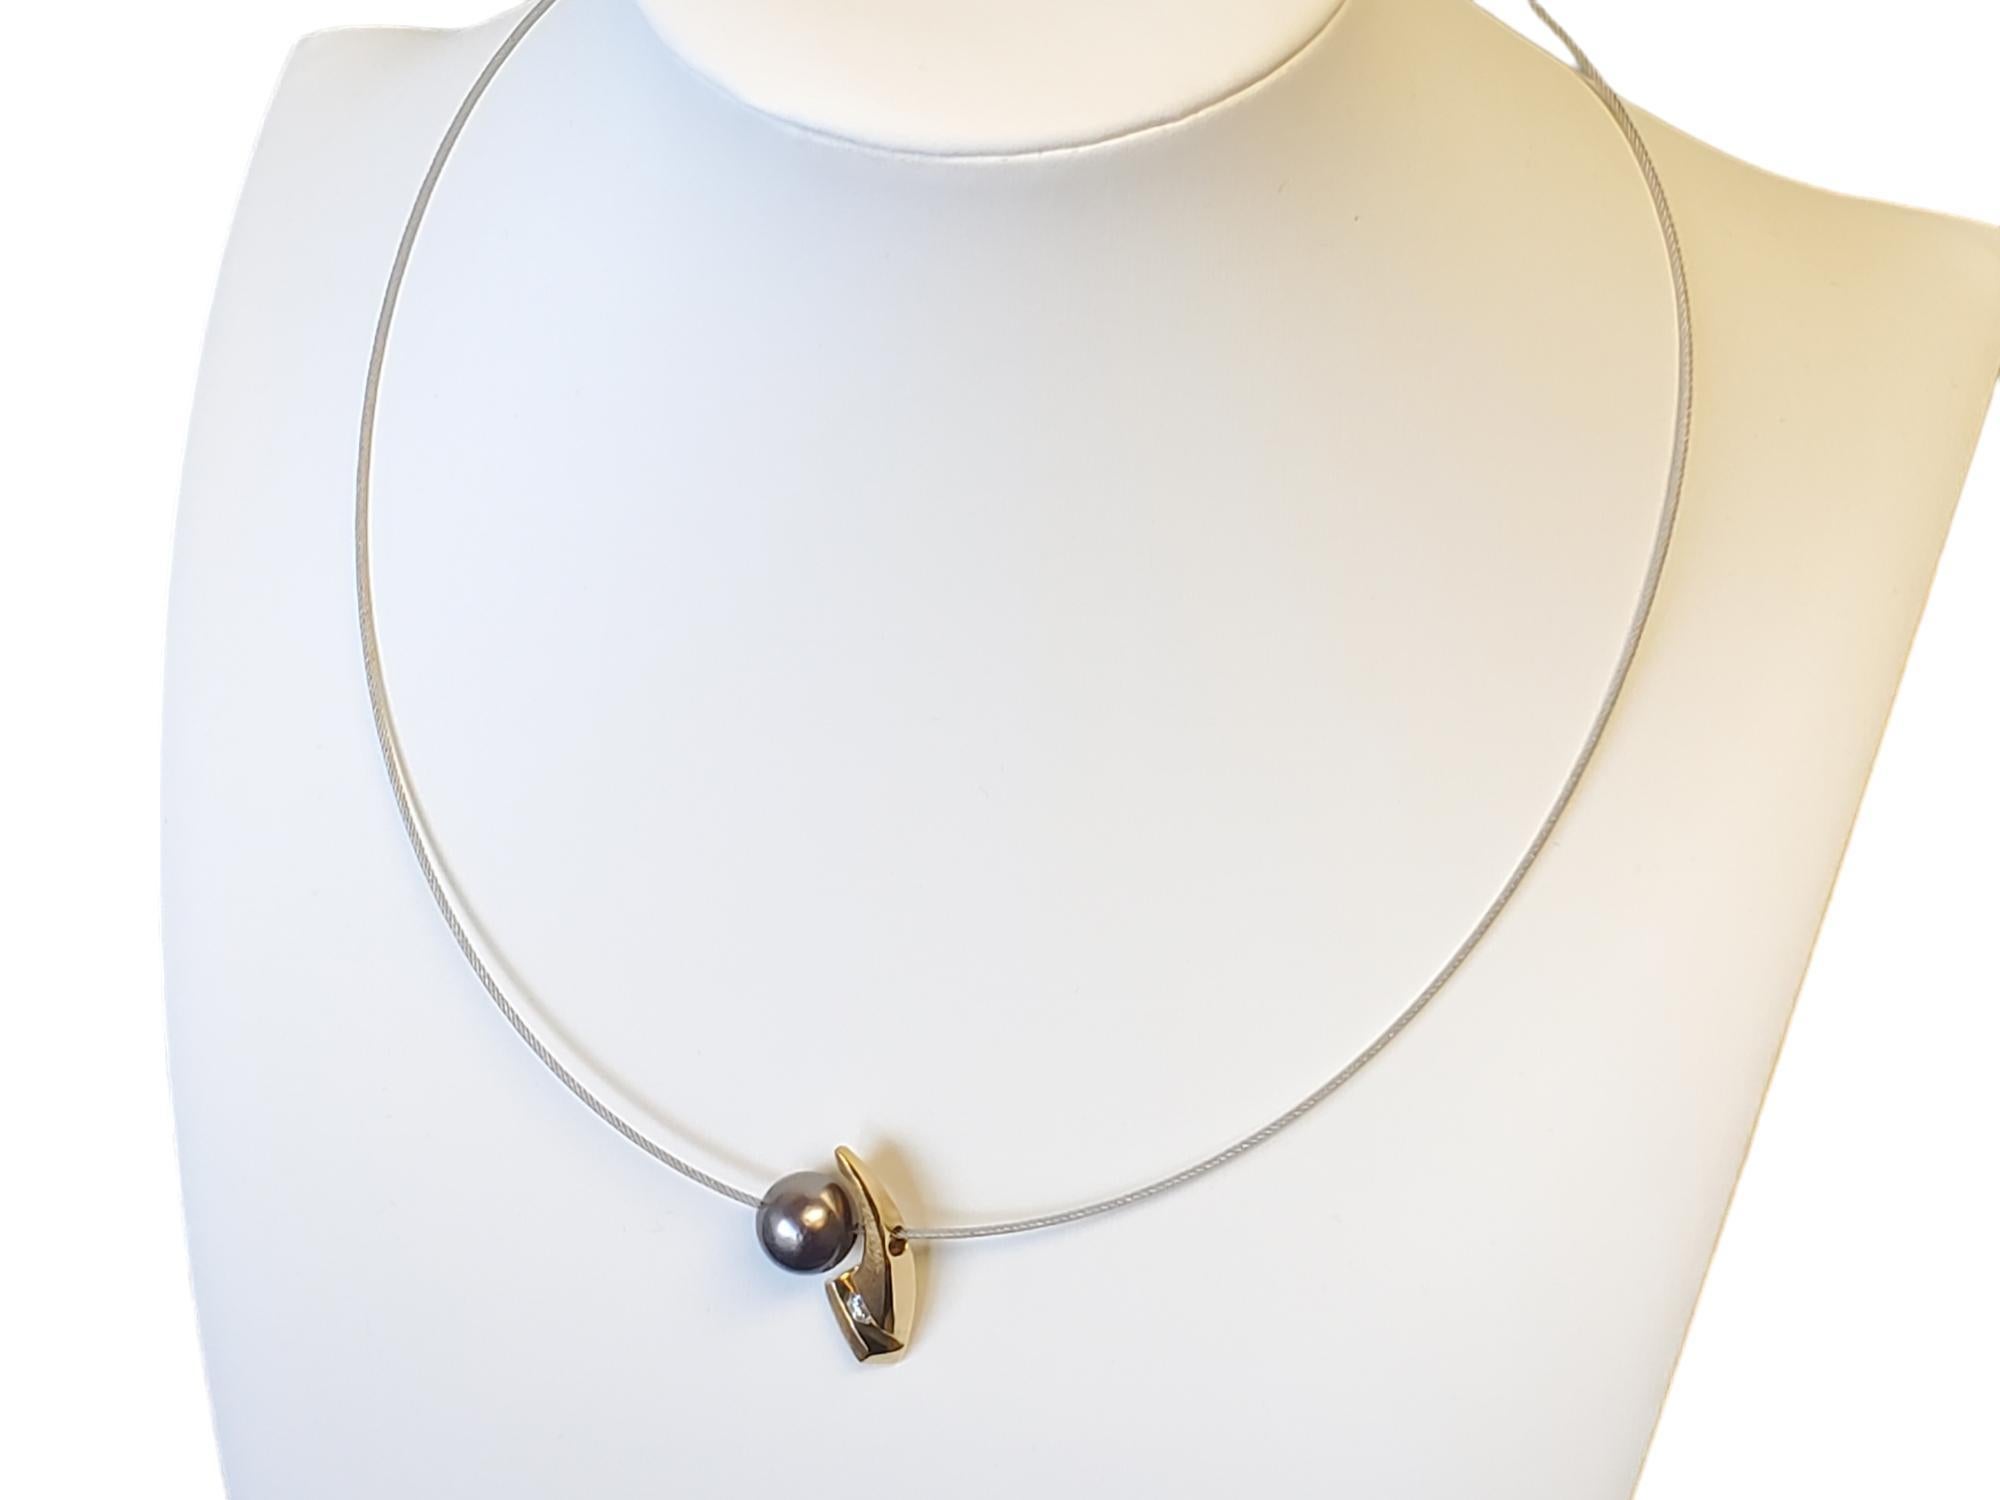 18k Designer Tahitian Pearl Diamond Steel Cable Necklace

Listed is a very chic modern 18k/steel cable necklace featuring an 18k pendant slide that shapes the side of this beautiful 10.7mm Tahitian Pearl. The diamond in the pendant is between